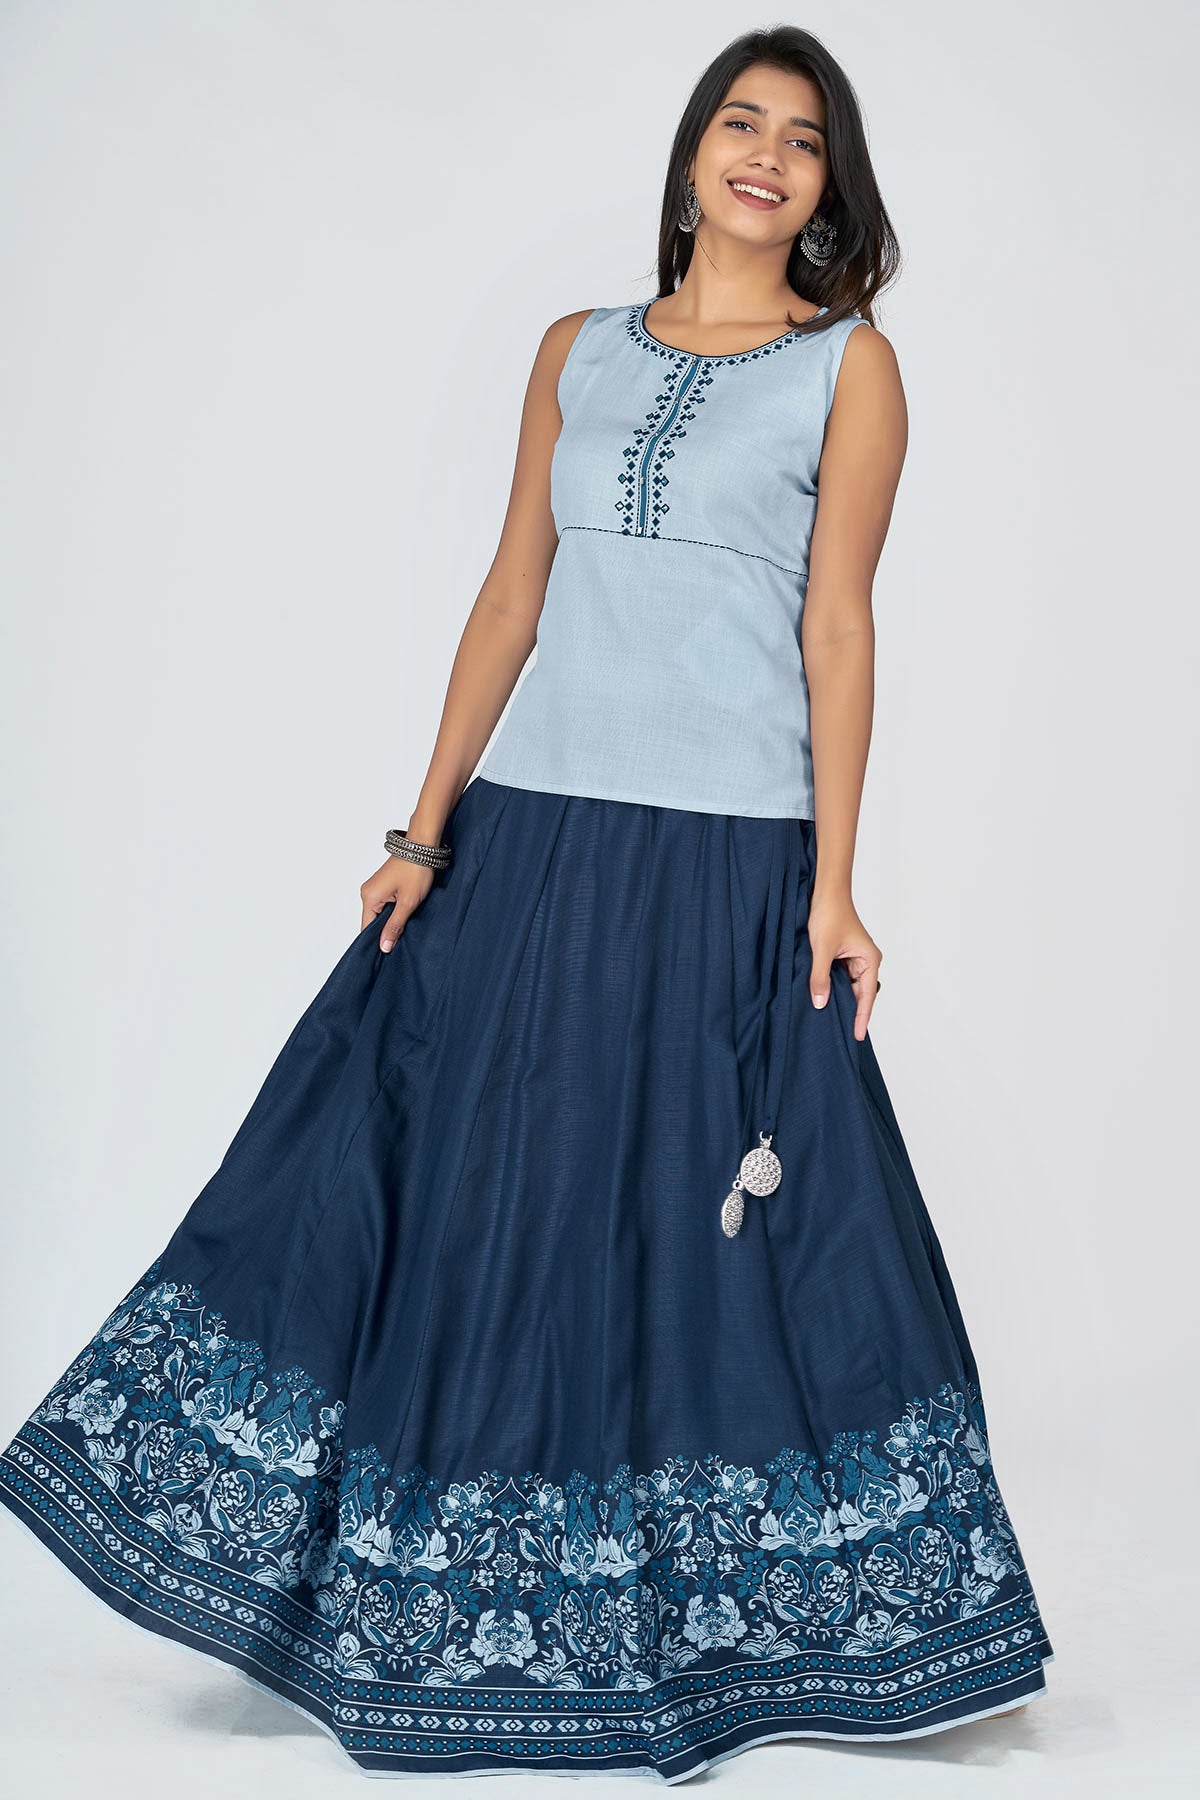 Mirror Embroidered Top & Cuckoo Printed Women's Skirt Set - Ice Blue & Navy Blue